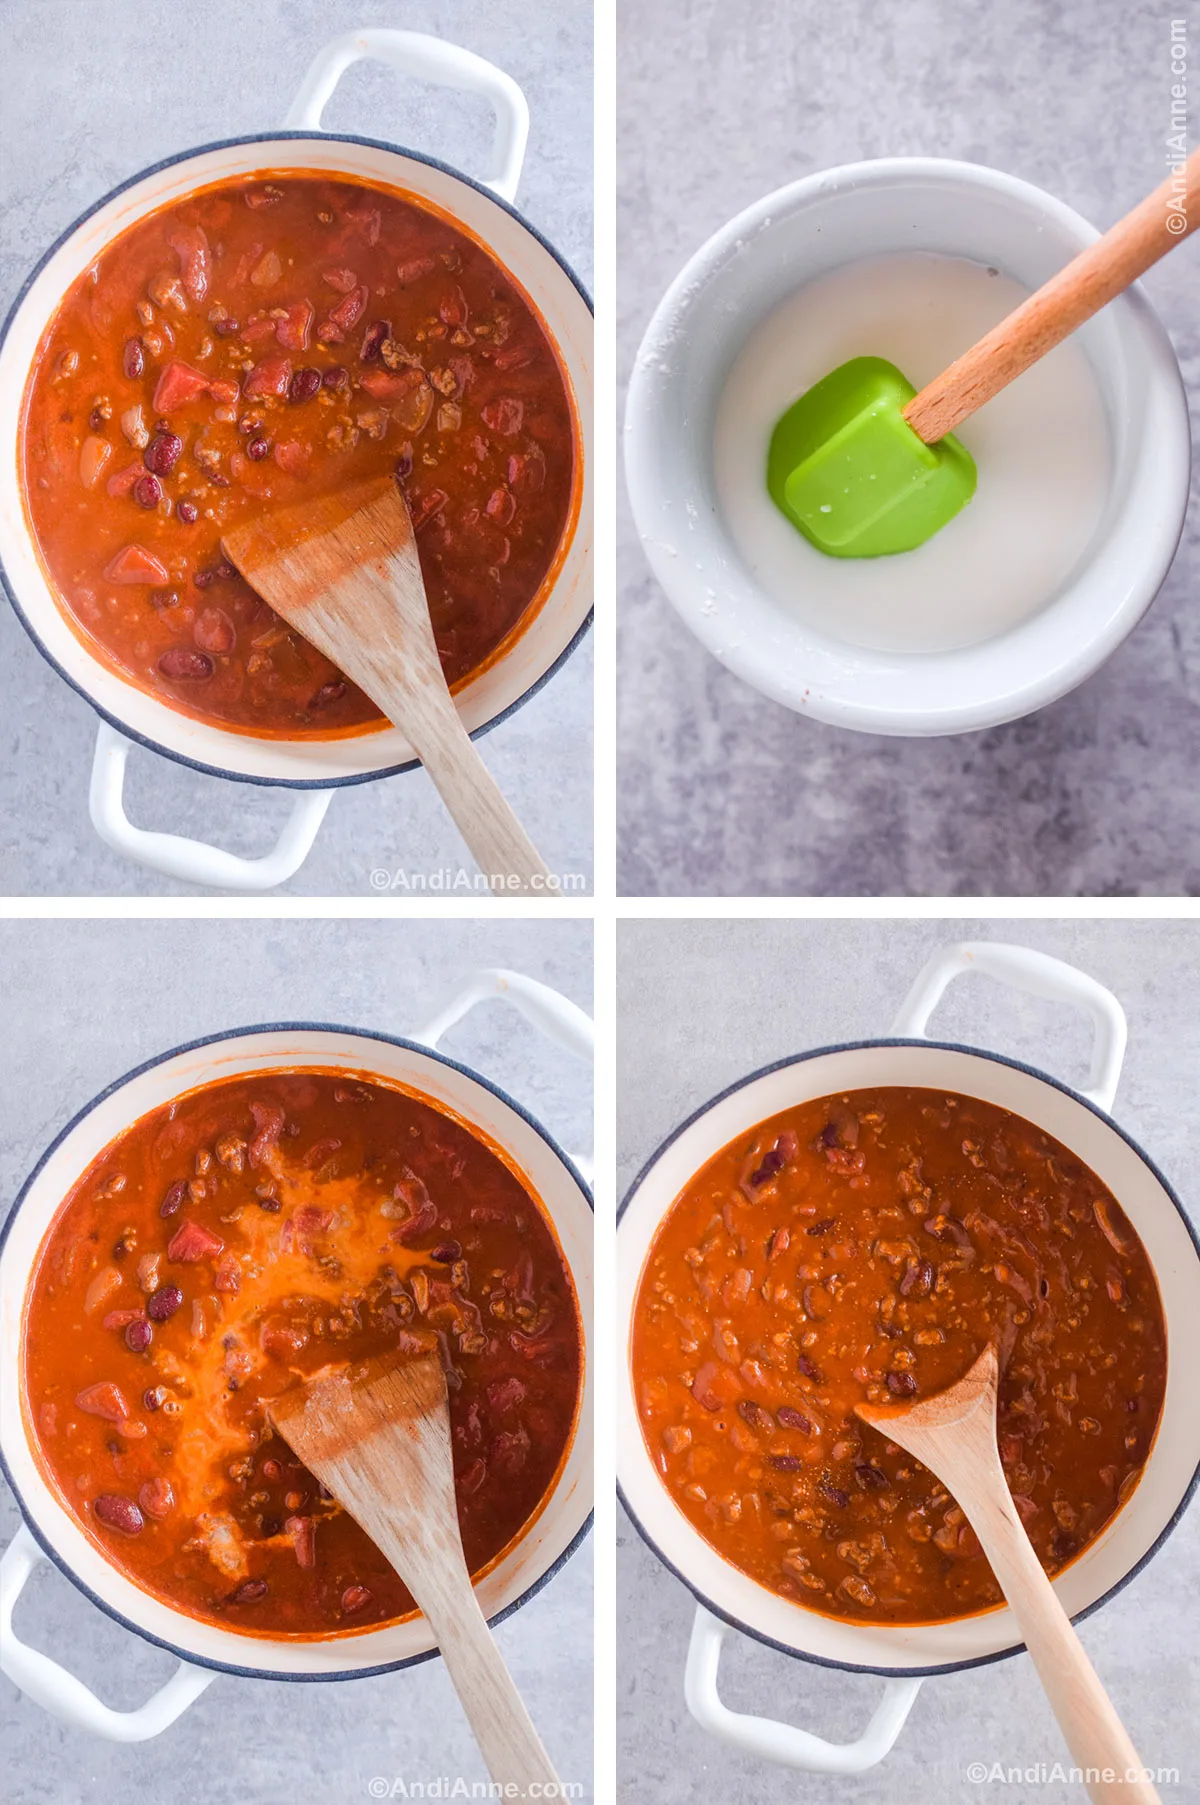 Four images together. Three are pot of chili in various cooking stages. Last one is bowl of white liquid with spatula.